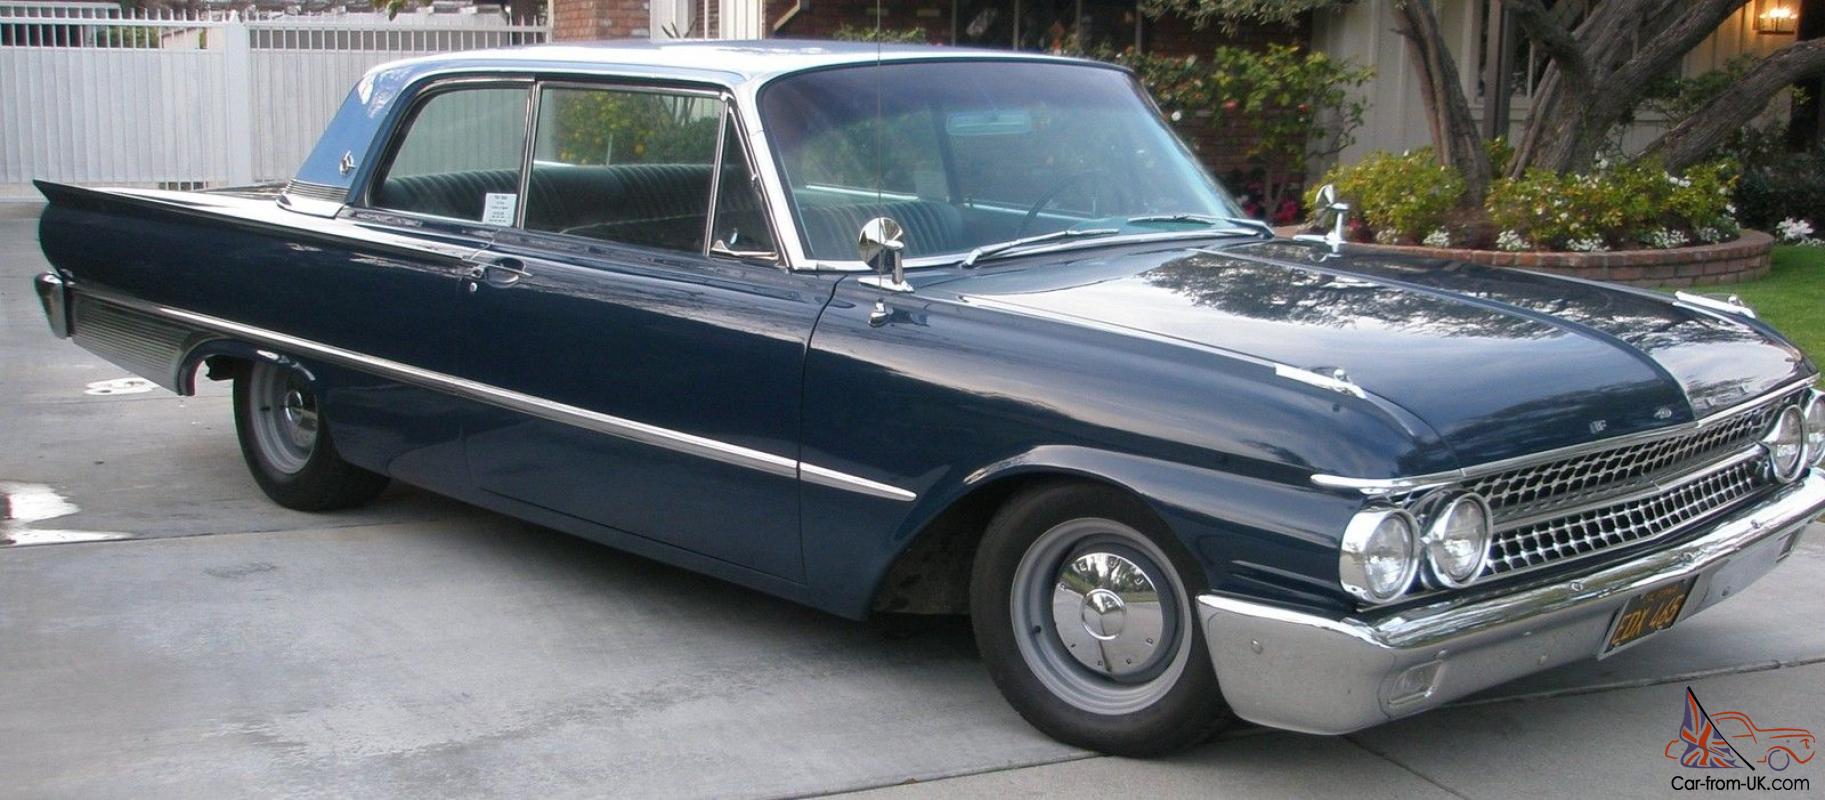 1961 Ford galaxie for sale uk #10